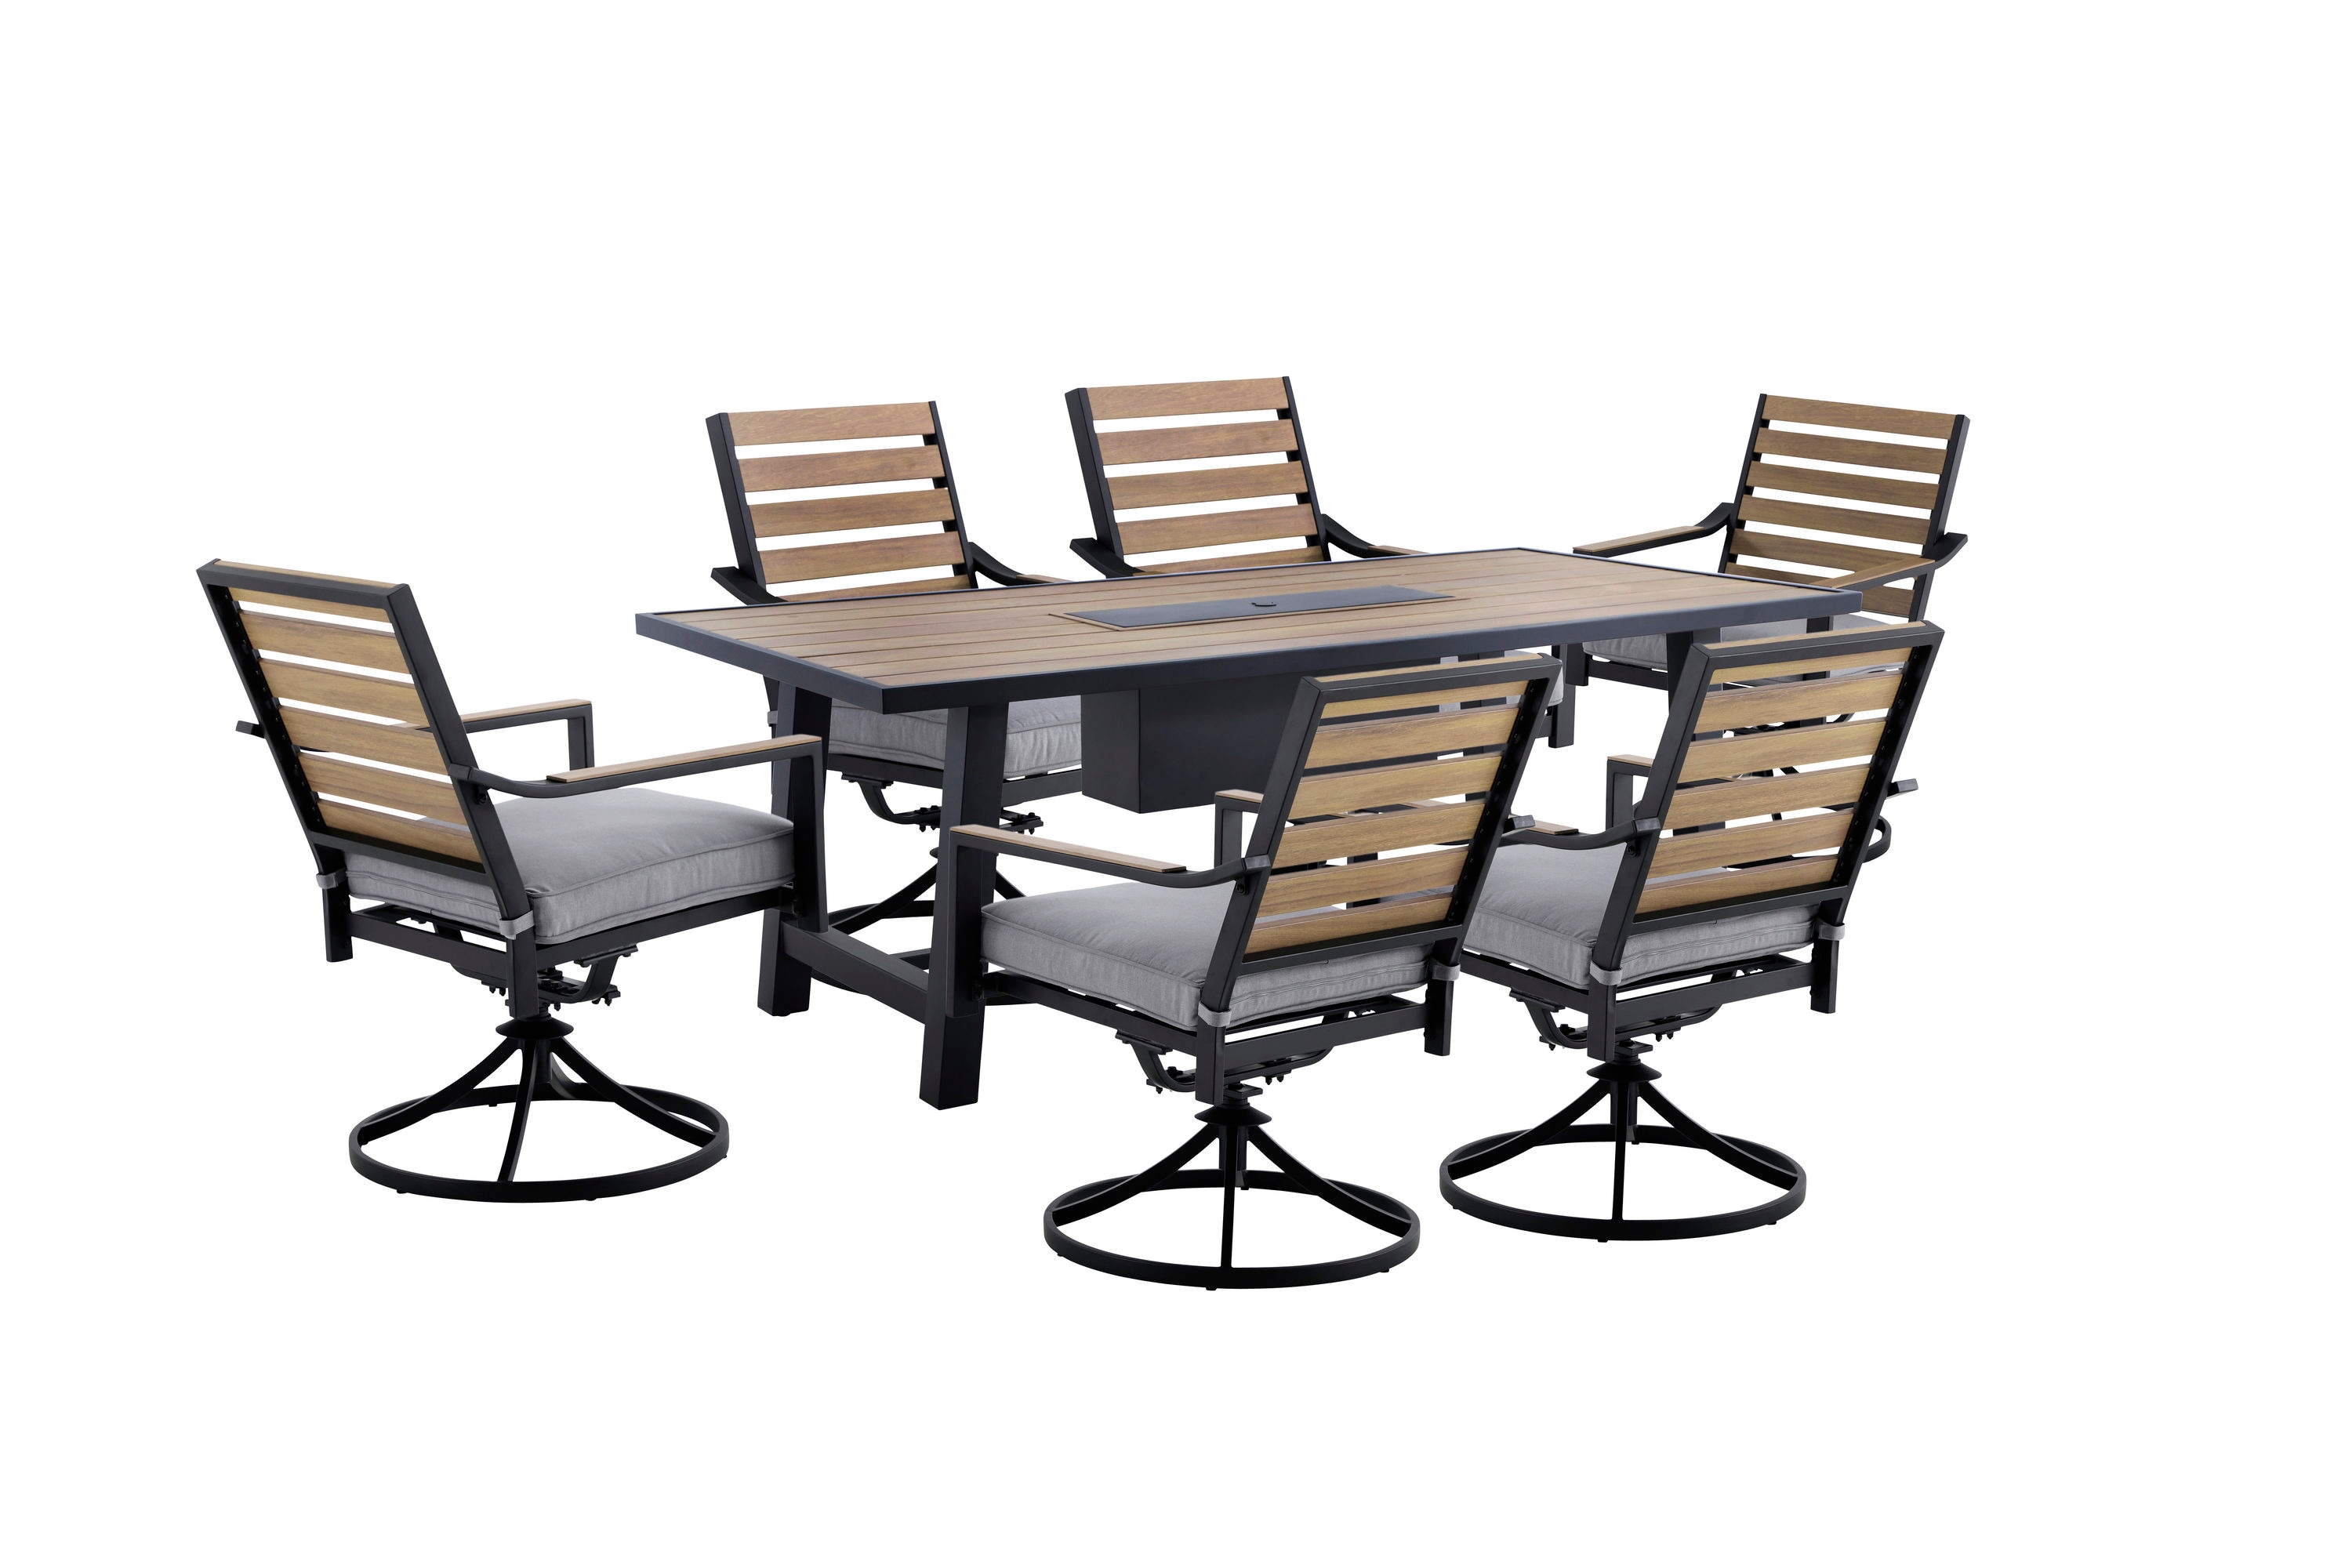 Roth Fairway Oaks 7 Piece Patio Dining, Outdoor Furniture Set With Swivel Chairs